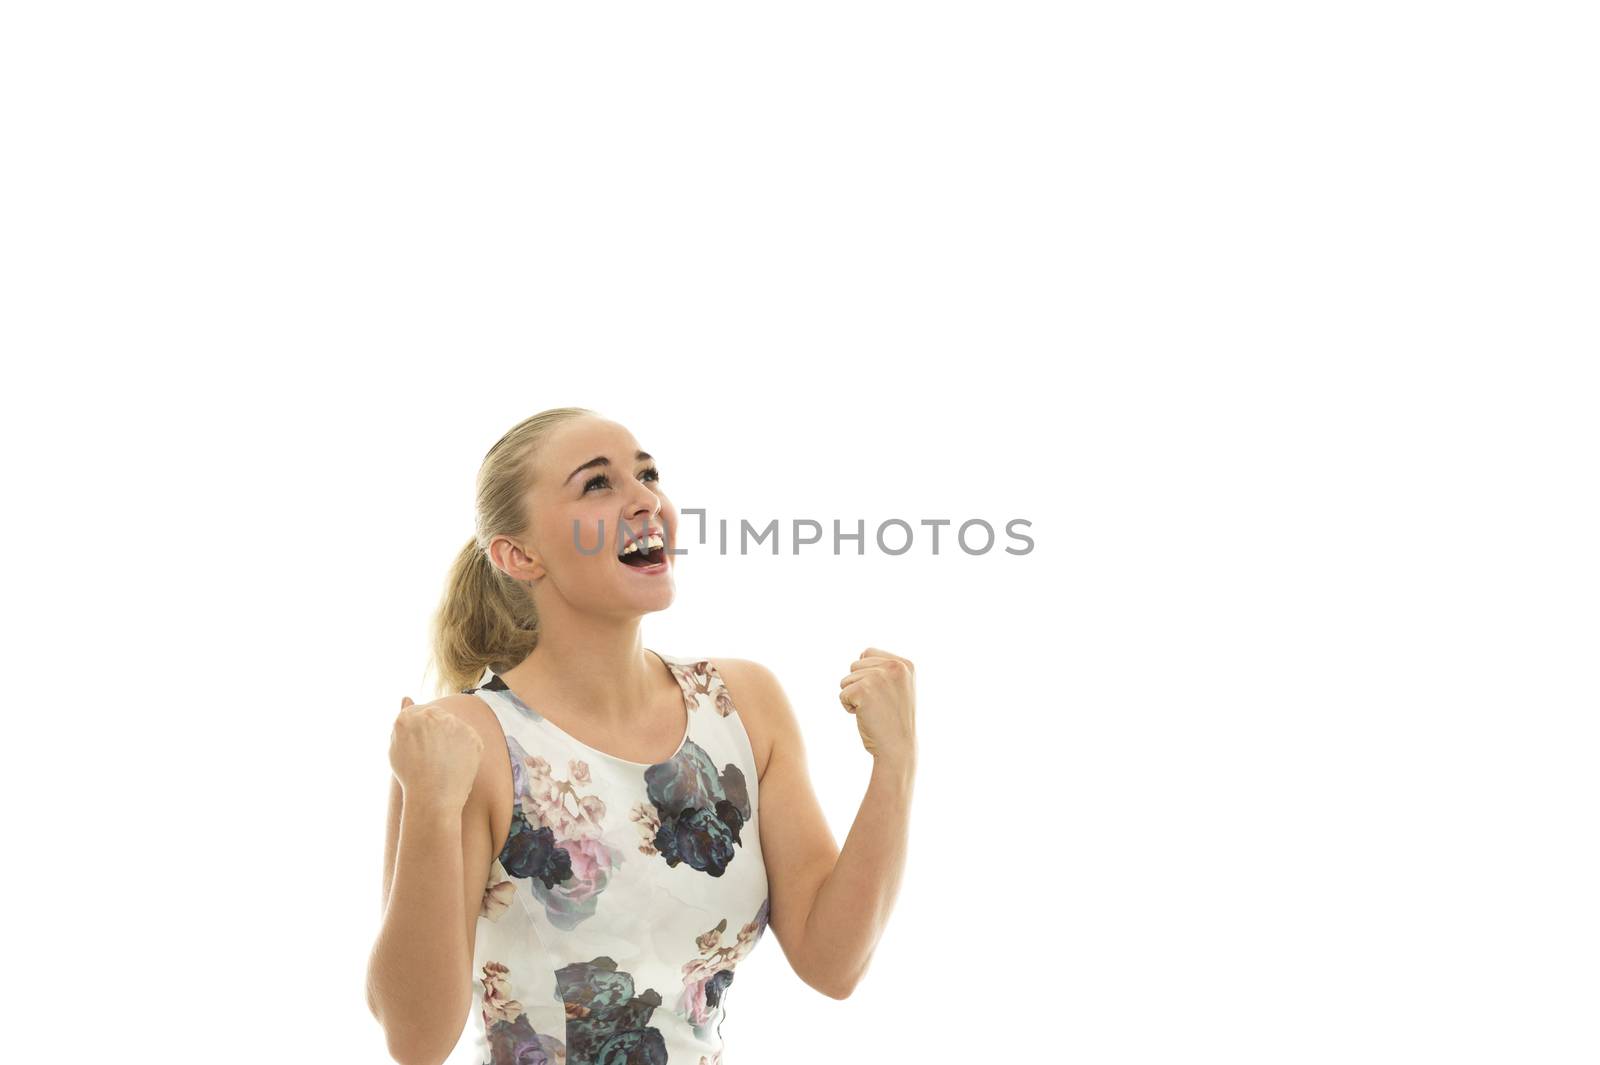 Elated jubilant young blond woman cheering and punching the air with her fists as she looks up with an excited grateful expression, isolated on white with copyspace